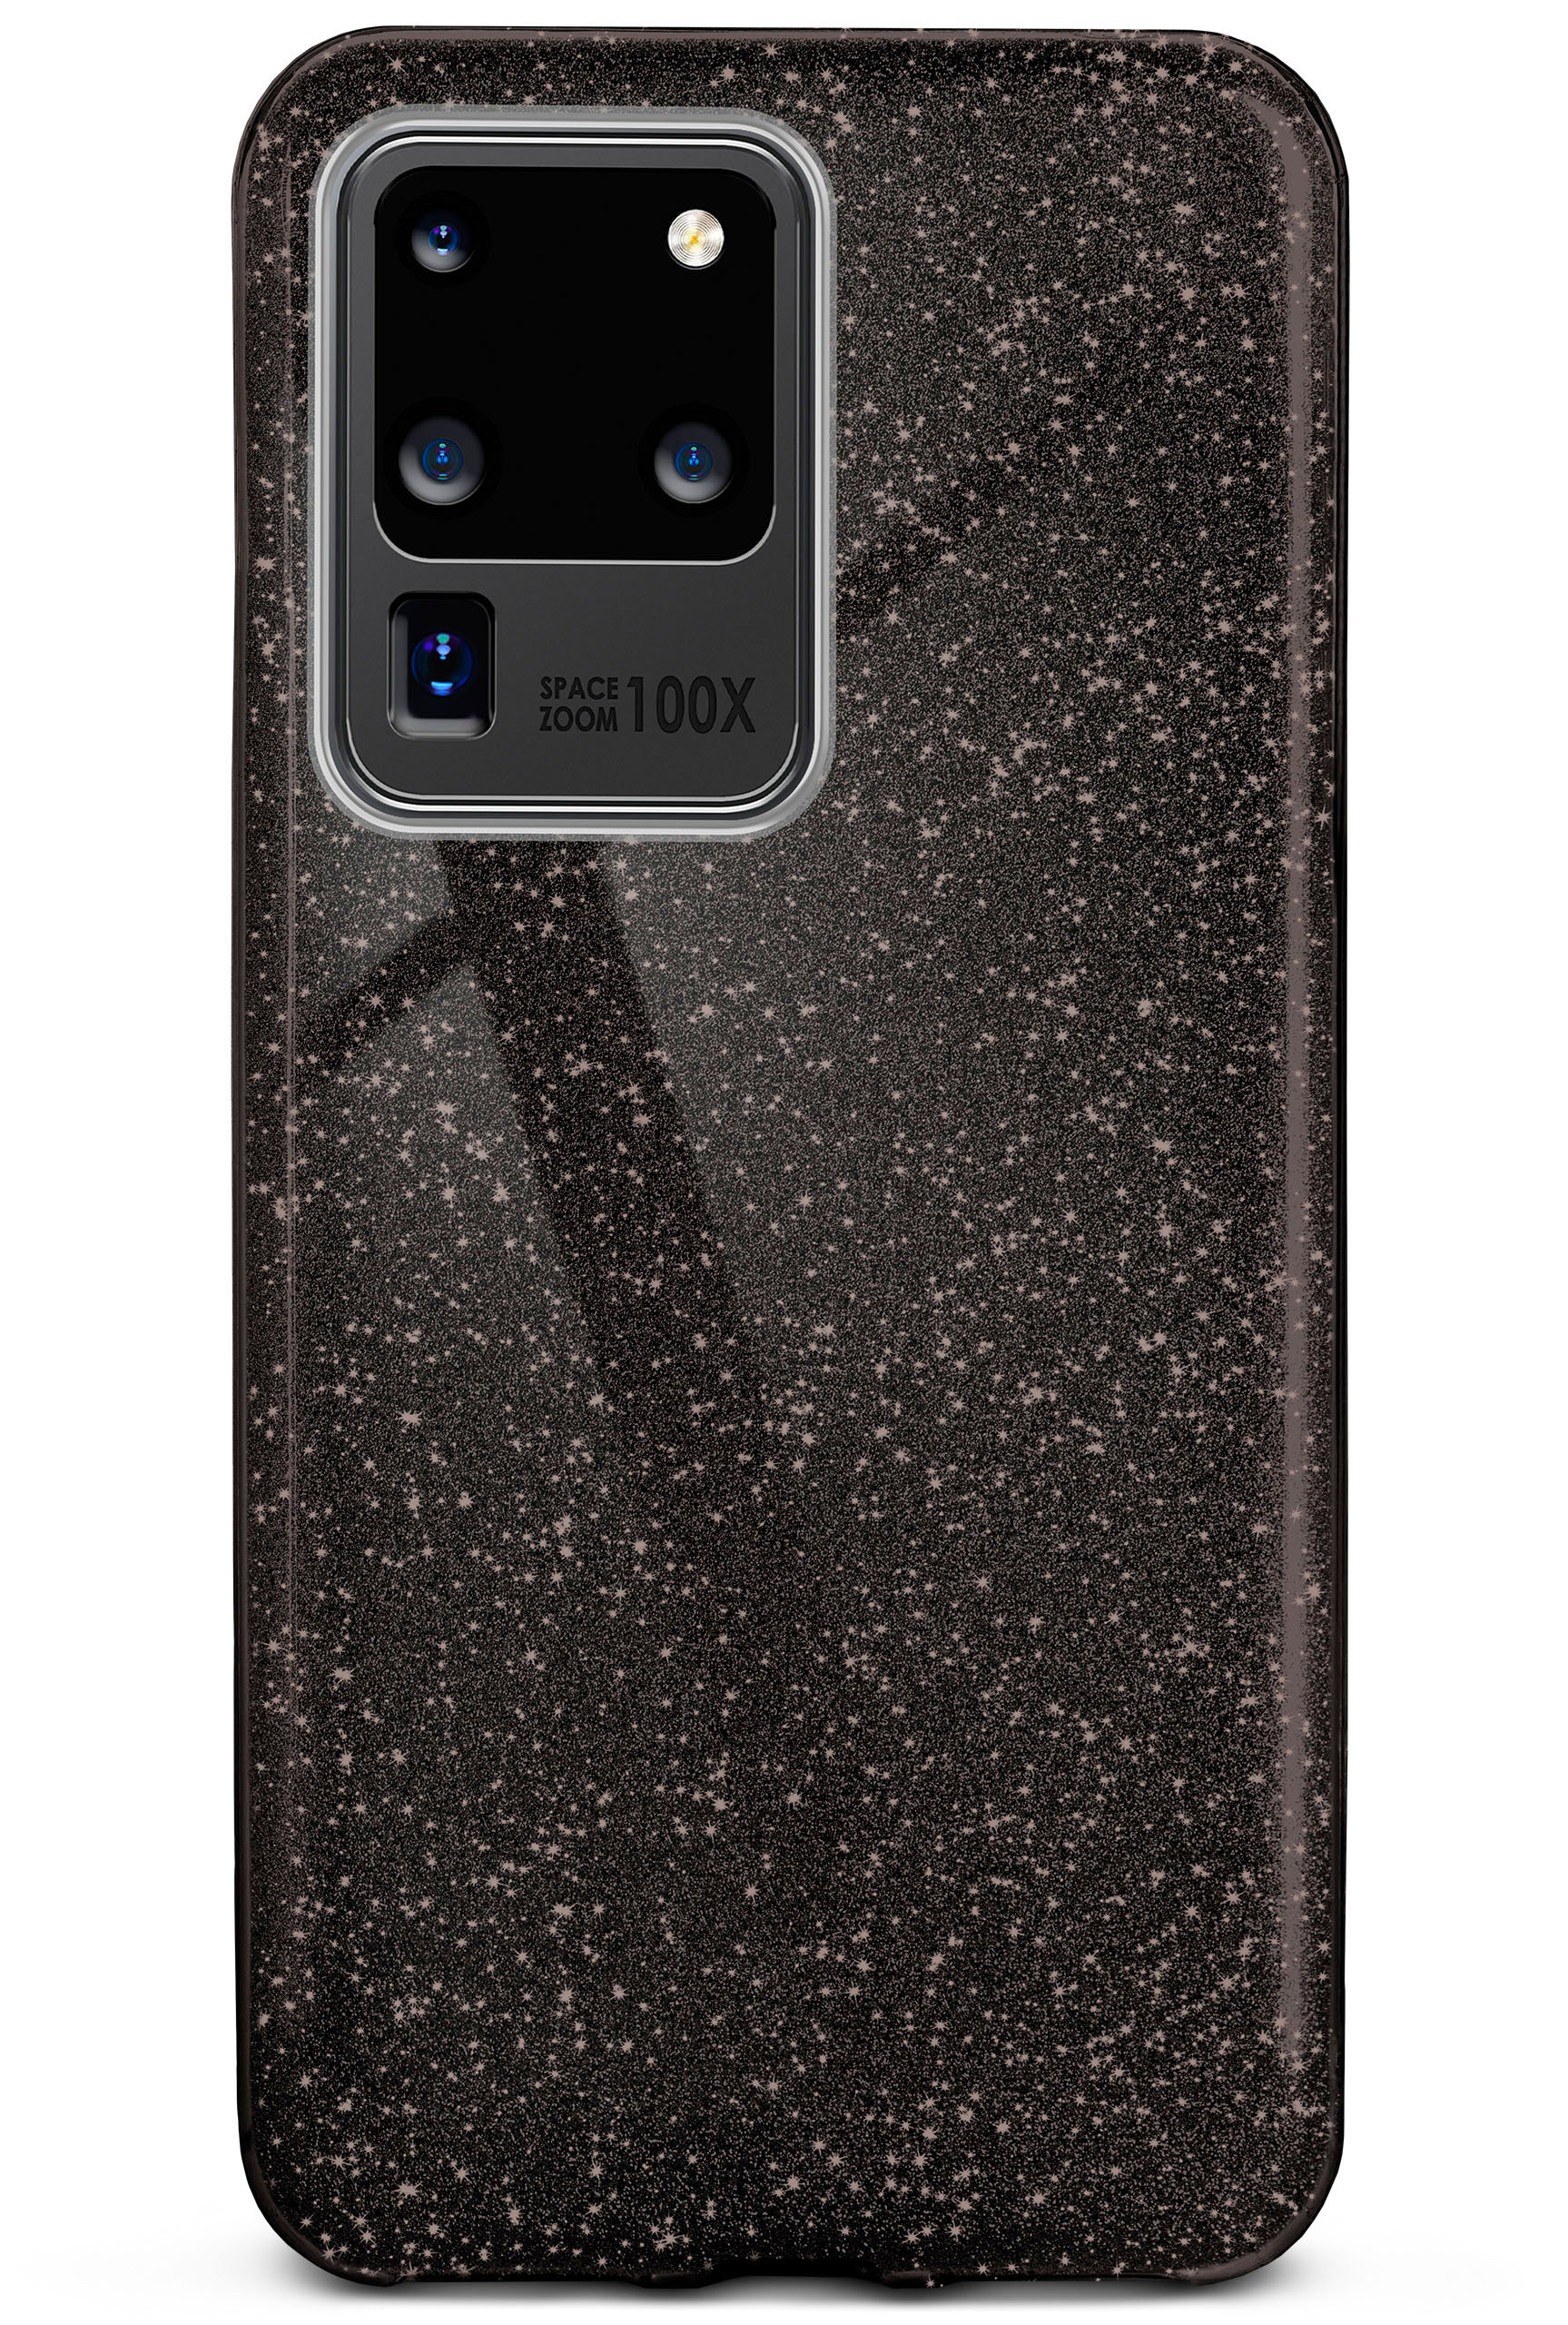 Glamour 5G, Glitter S20 / Samsung, Backcover, Ultra Black Case, - Galaxy ONEFLOW